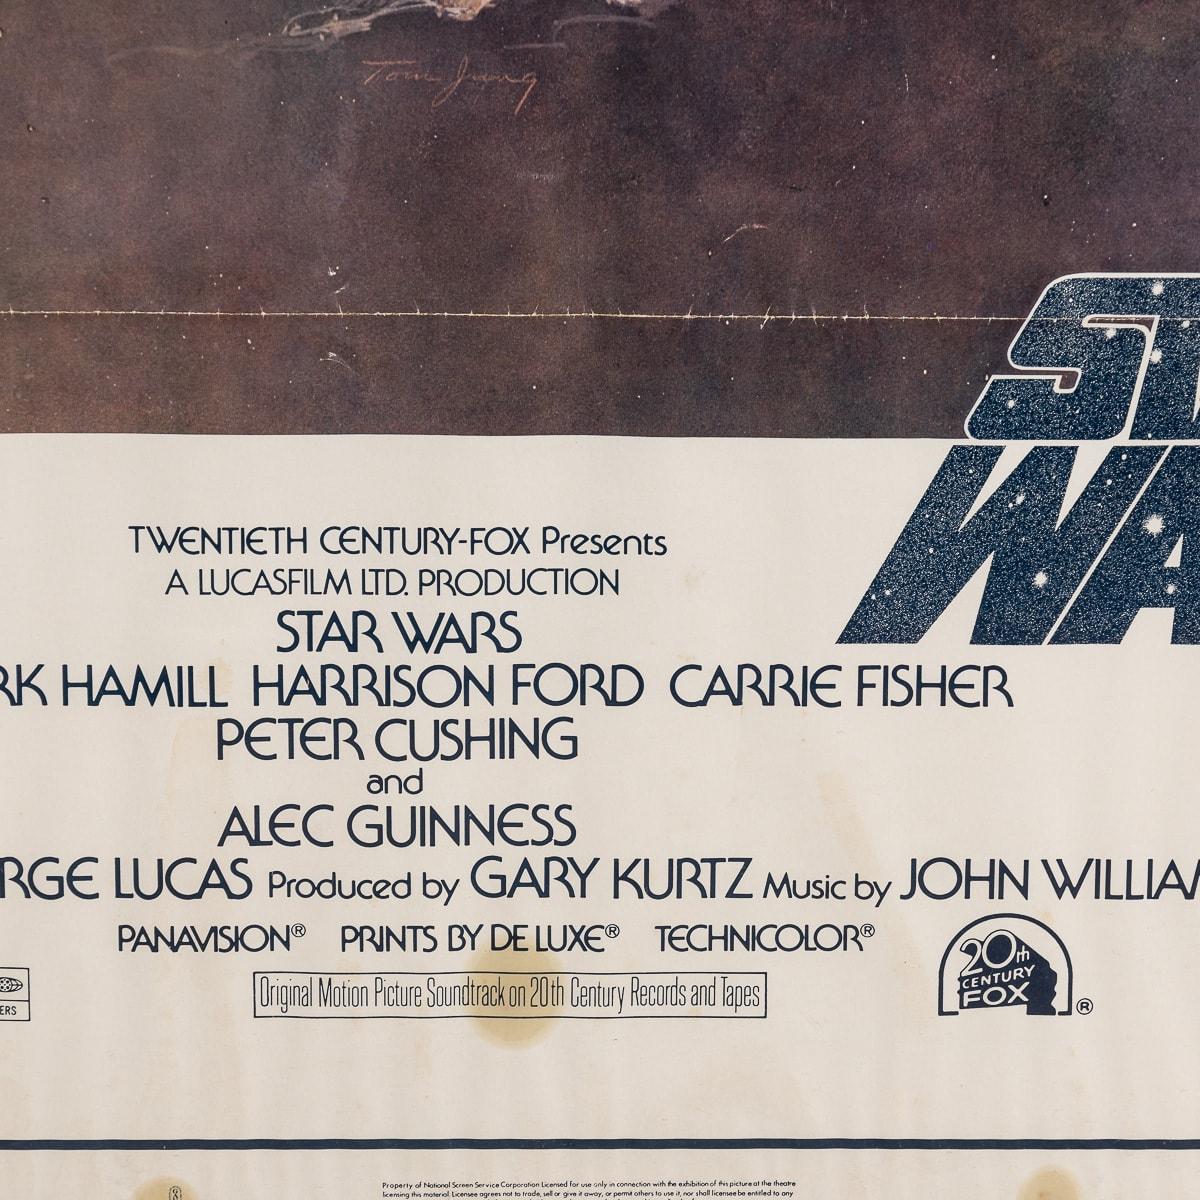 Original U.S. Release Star Wars 'A New Hope' Style A Poster 77/21 c.1977 For Sale 9